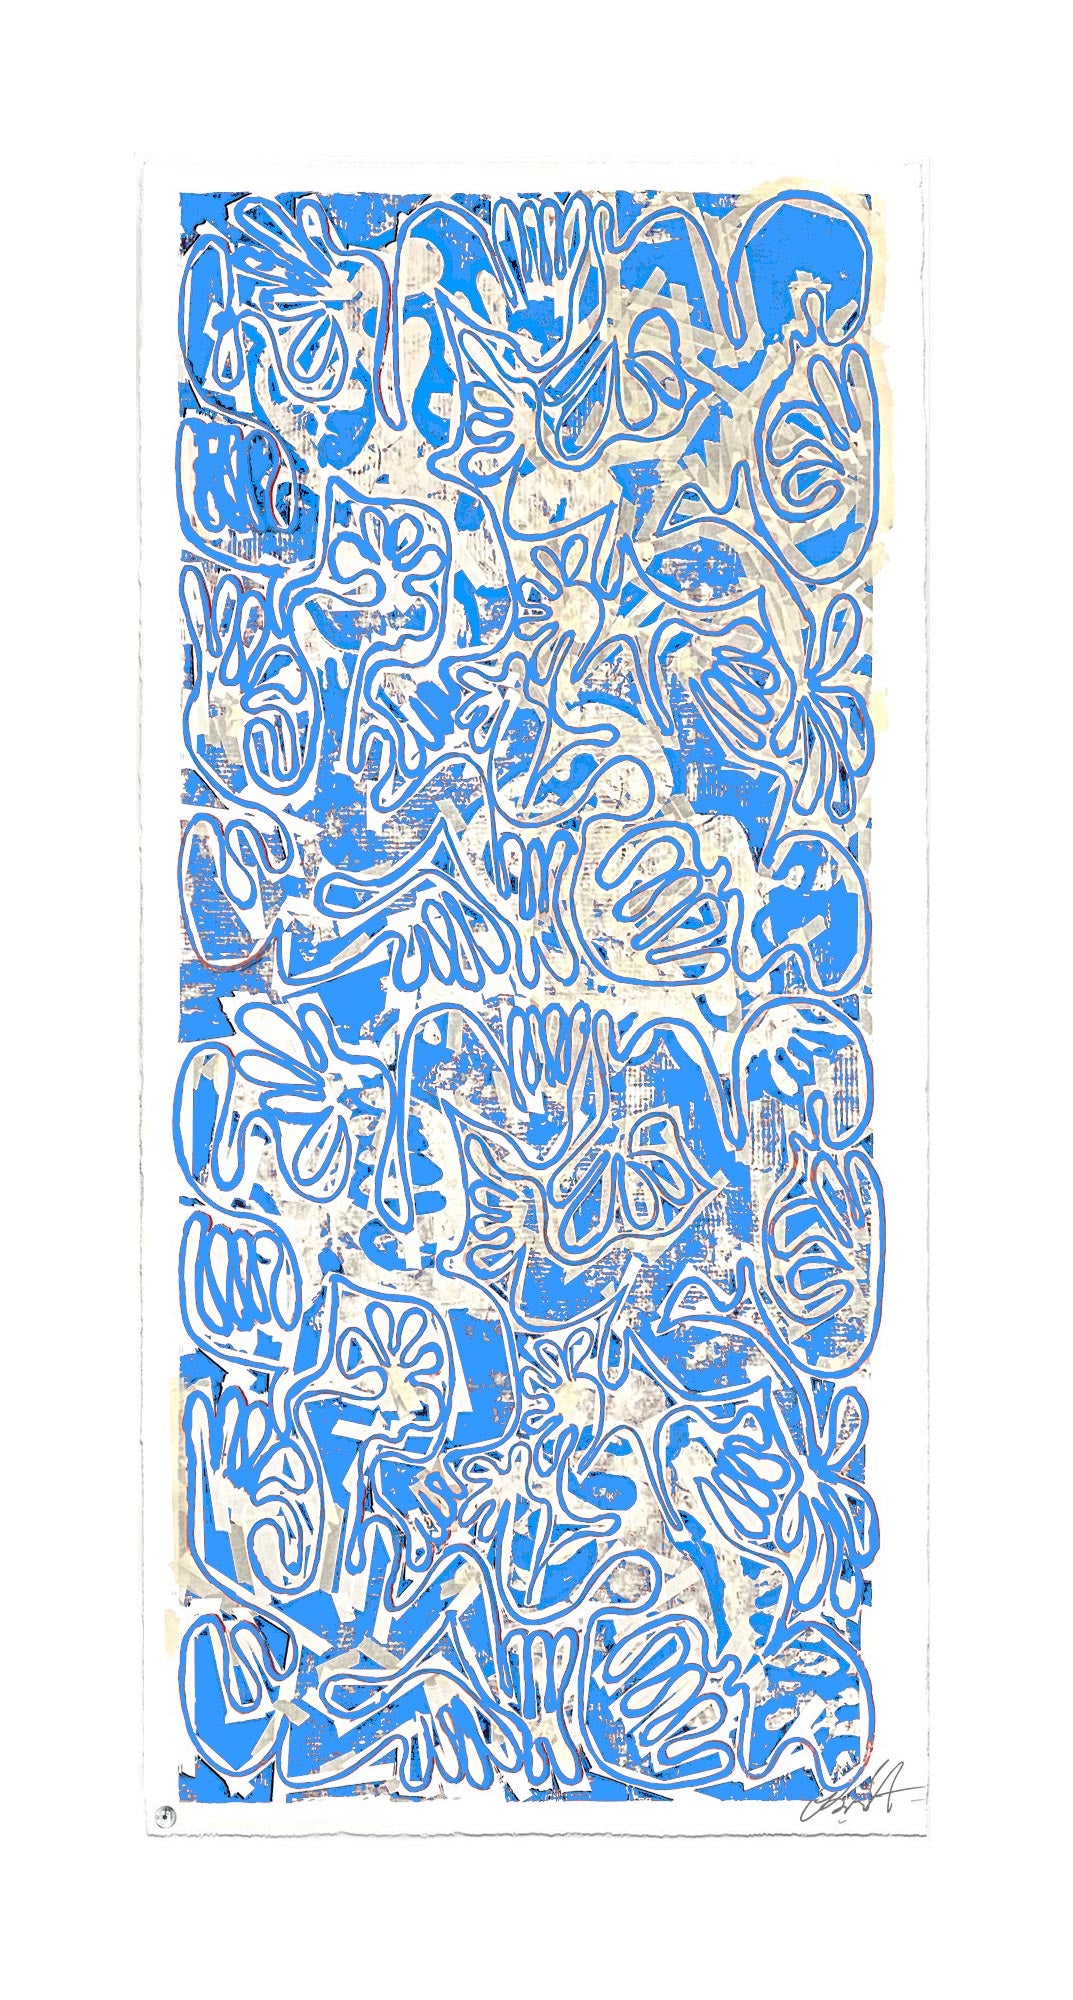 "Covid Chaos Pacific Blue (40 x 100in)" by Robert Santore ©2022. Framed, Hand painted artist silkscreen print, hand printed on the finest archival cold press cotton rag paper with hand torn edges. Painted in the Manhattan studio.